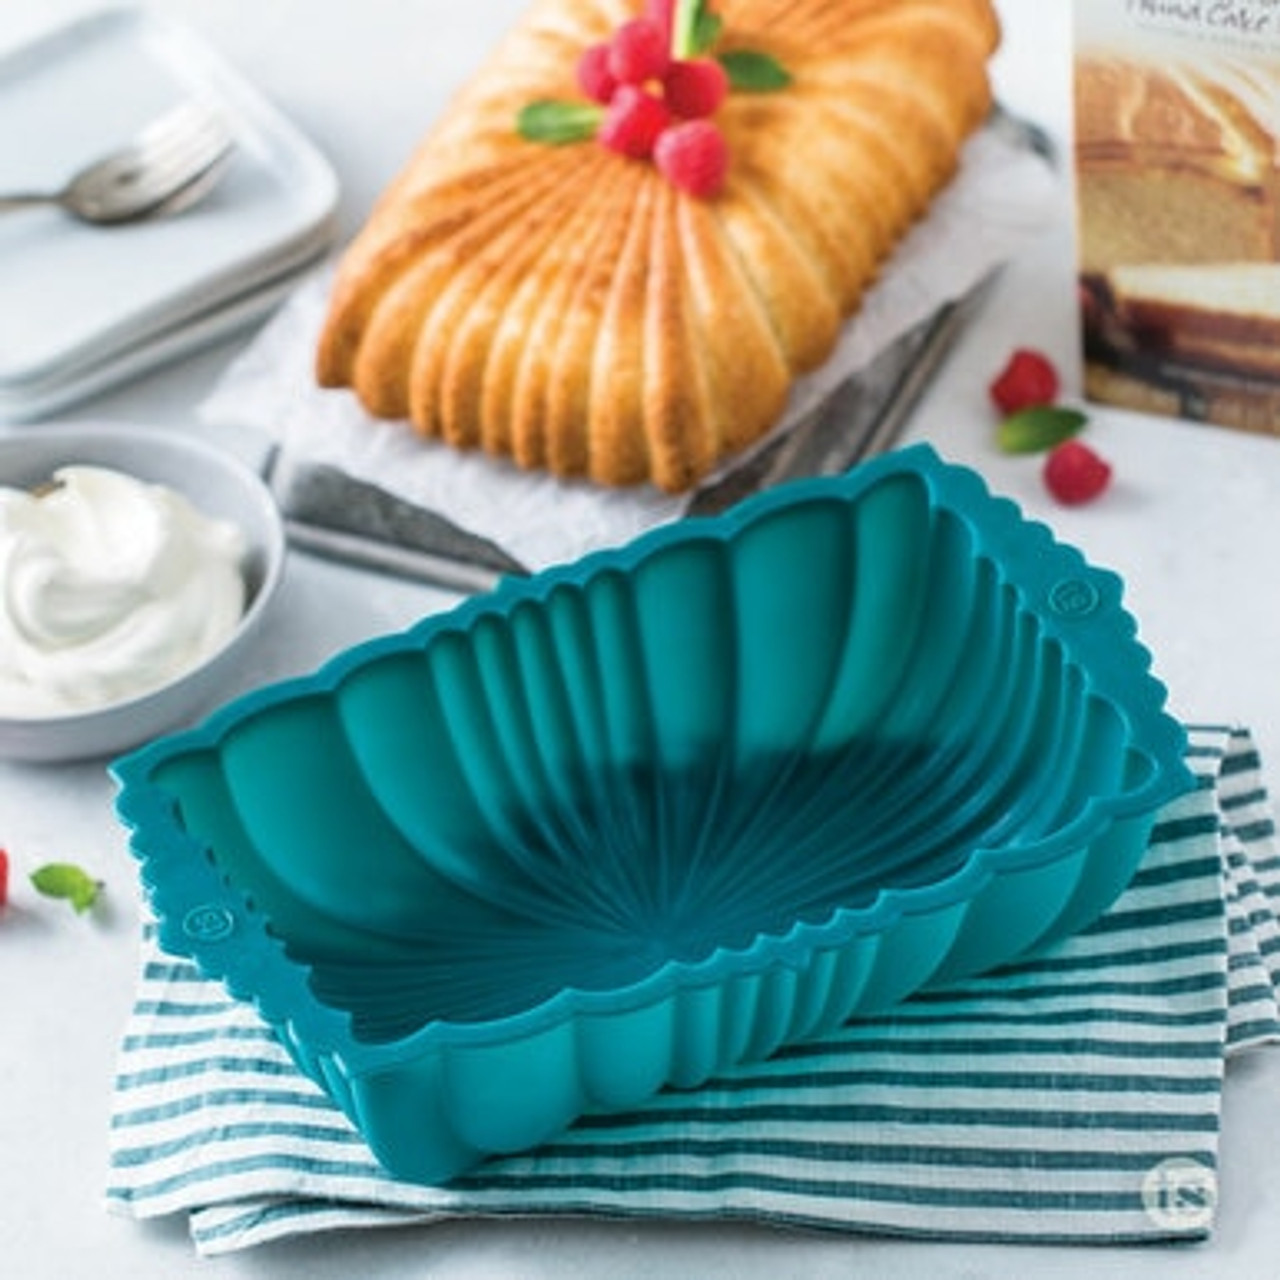 Buy Silicone Loaf Pan (Medium) from Cook'n'Chic